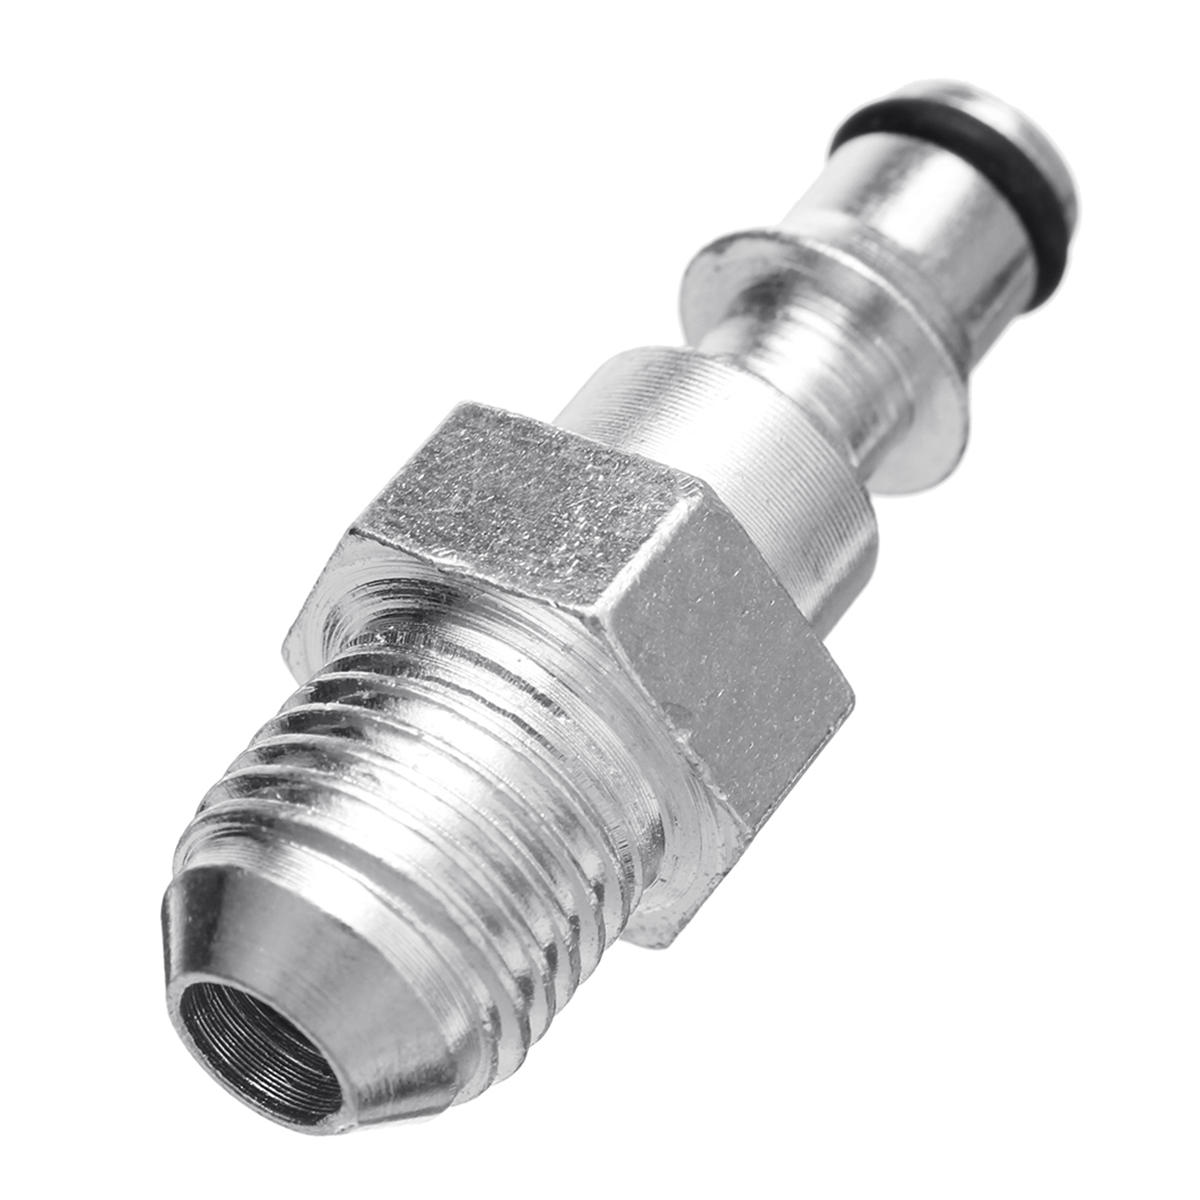 Quick Connection Pressure Washer Gun Hose Fitting To M14 Adapter Convex Head For Lavor VAX